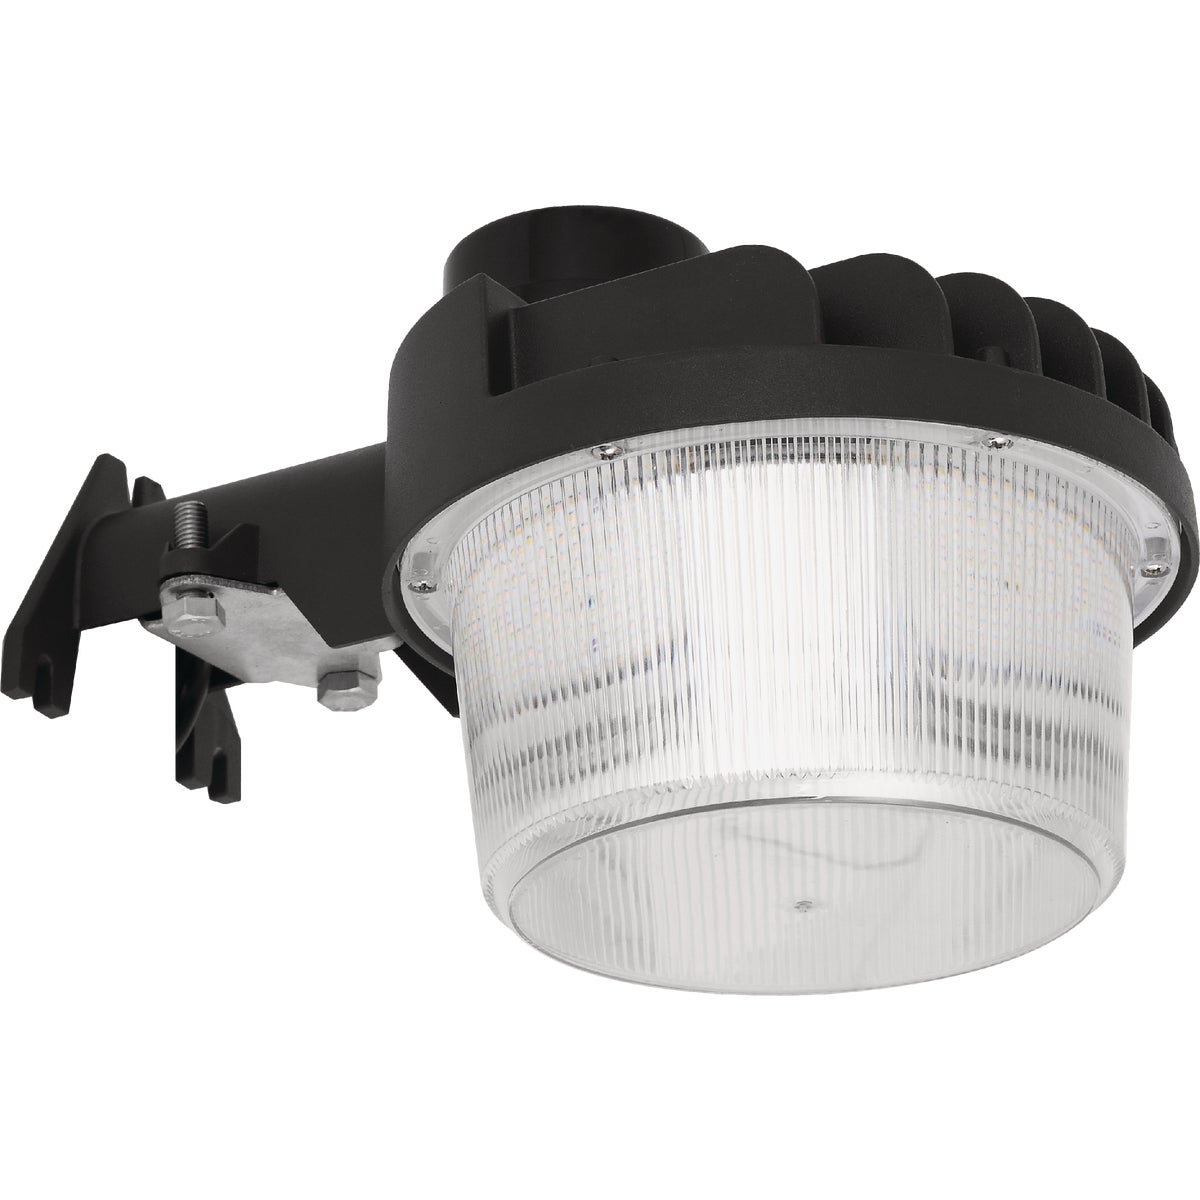 Dusk to Dawn LED Outdoor Area Light, 8644 Lm.